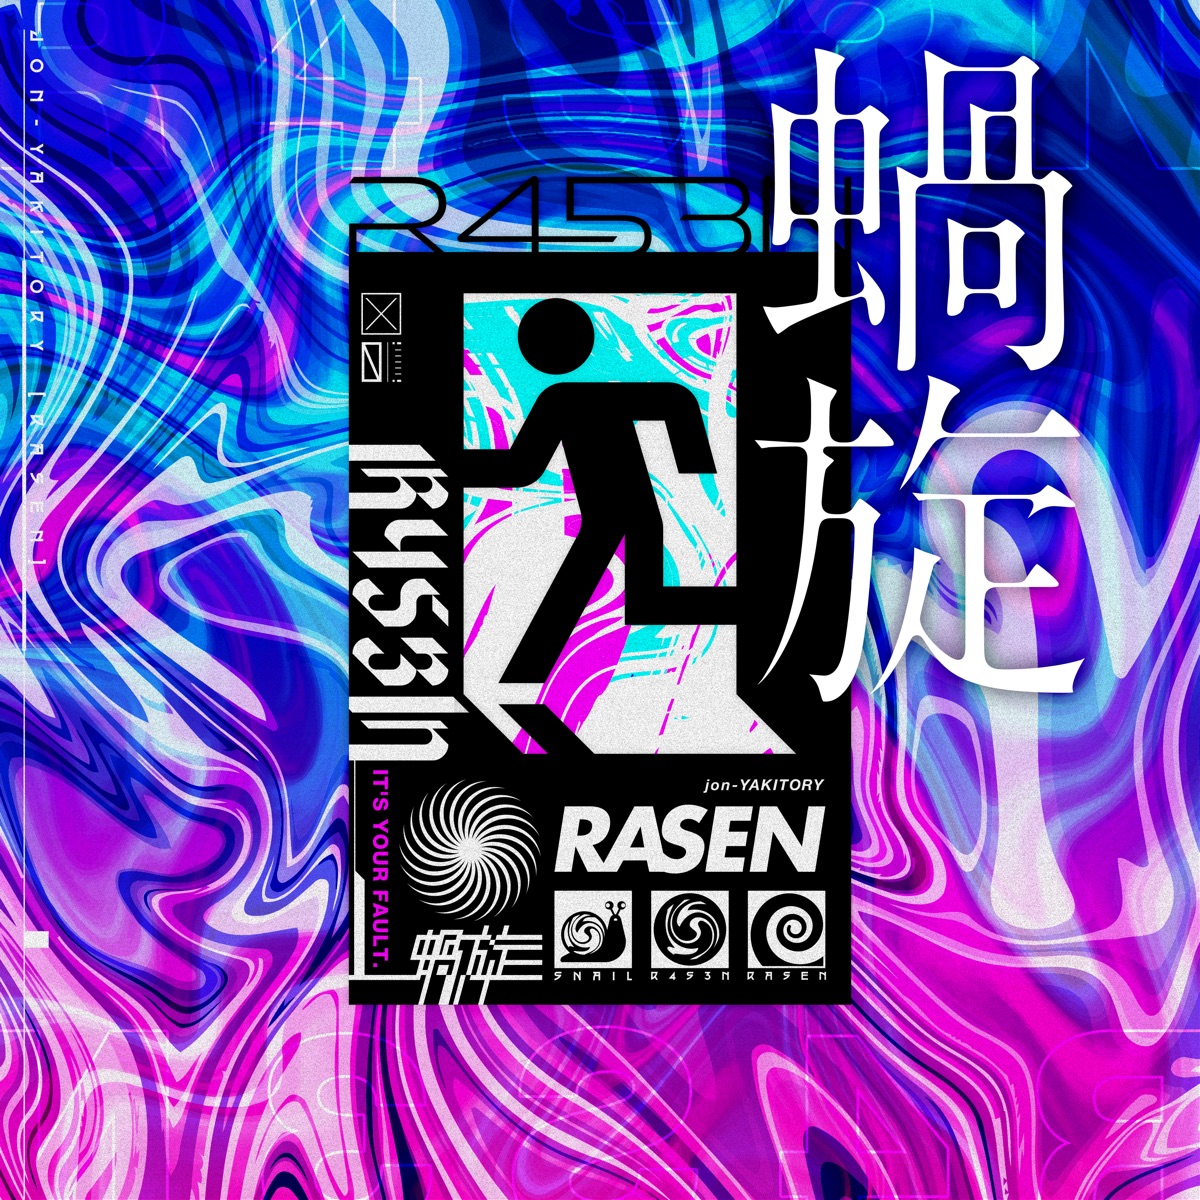 Cover art for『jon-YAKITORY feat. Ado - 蝸旋』from the release『Rasen (feat. Ado)